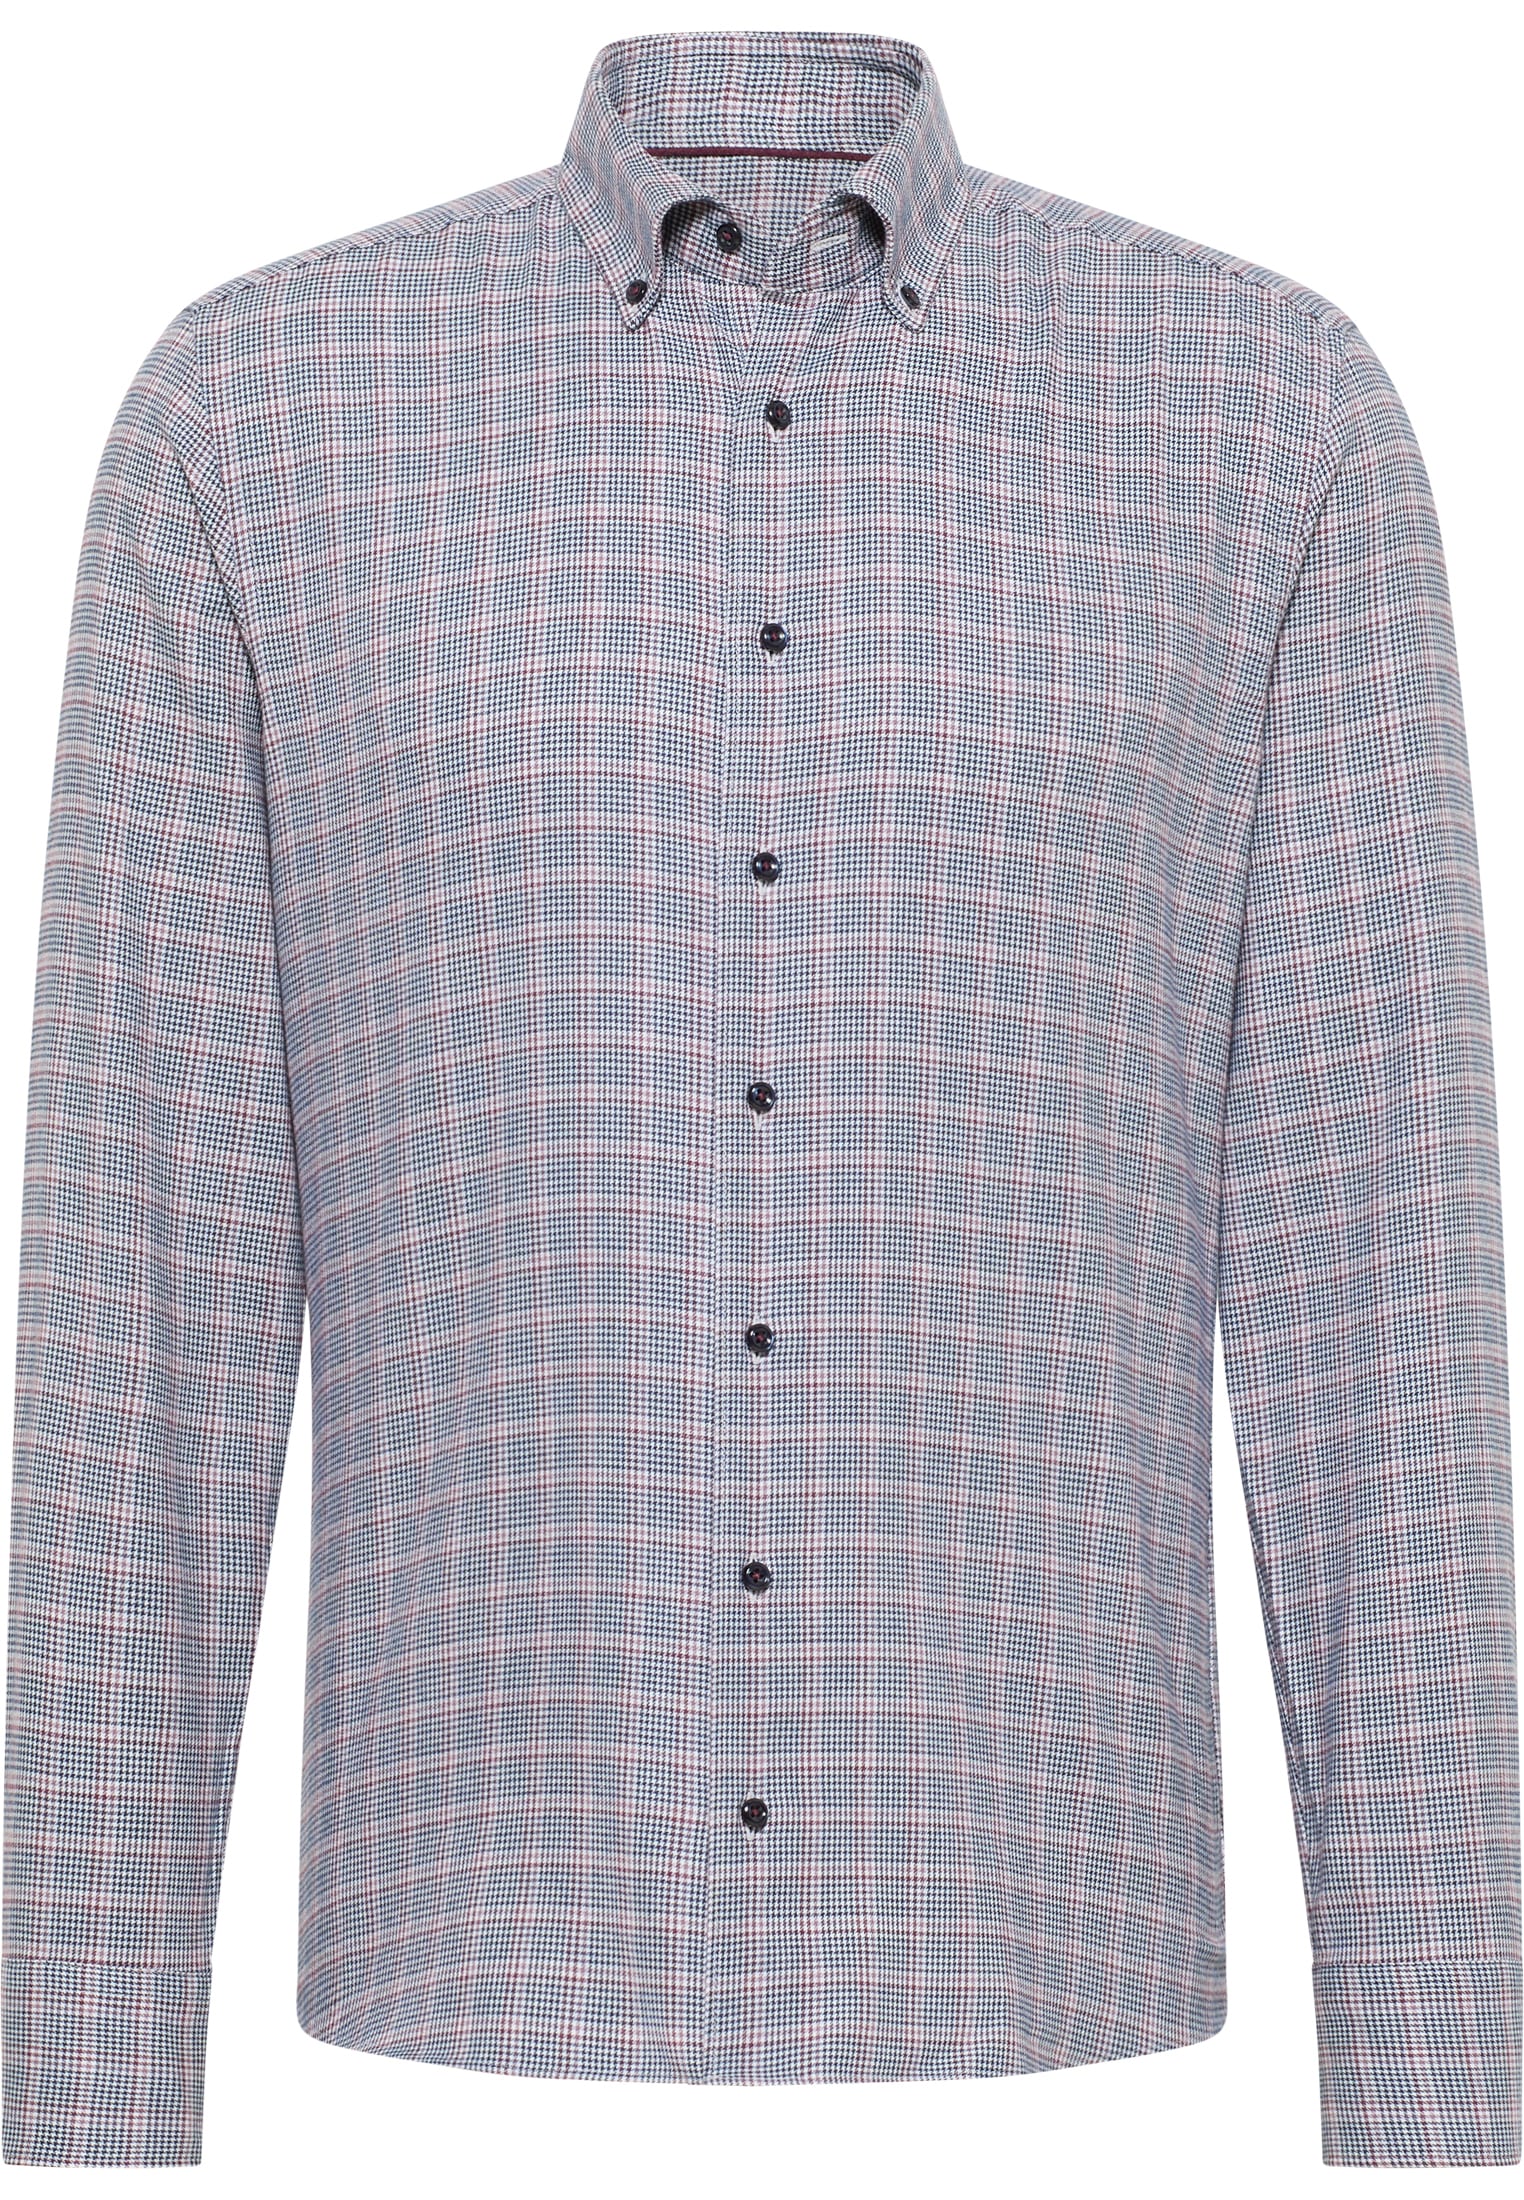 SLIM FIT Shirt in wine red checkered